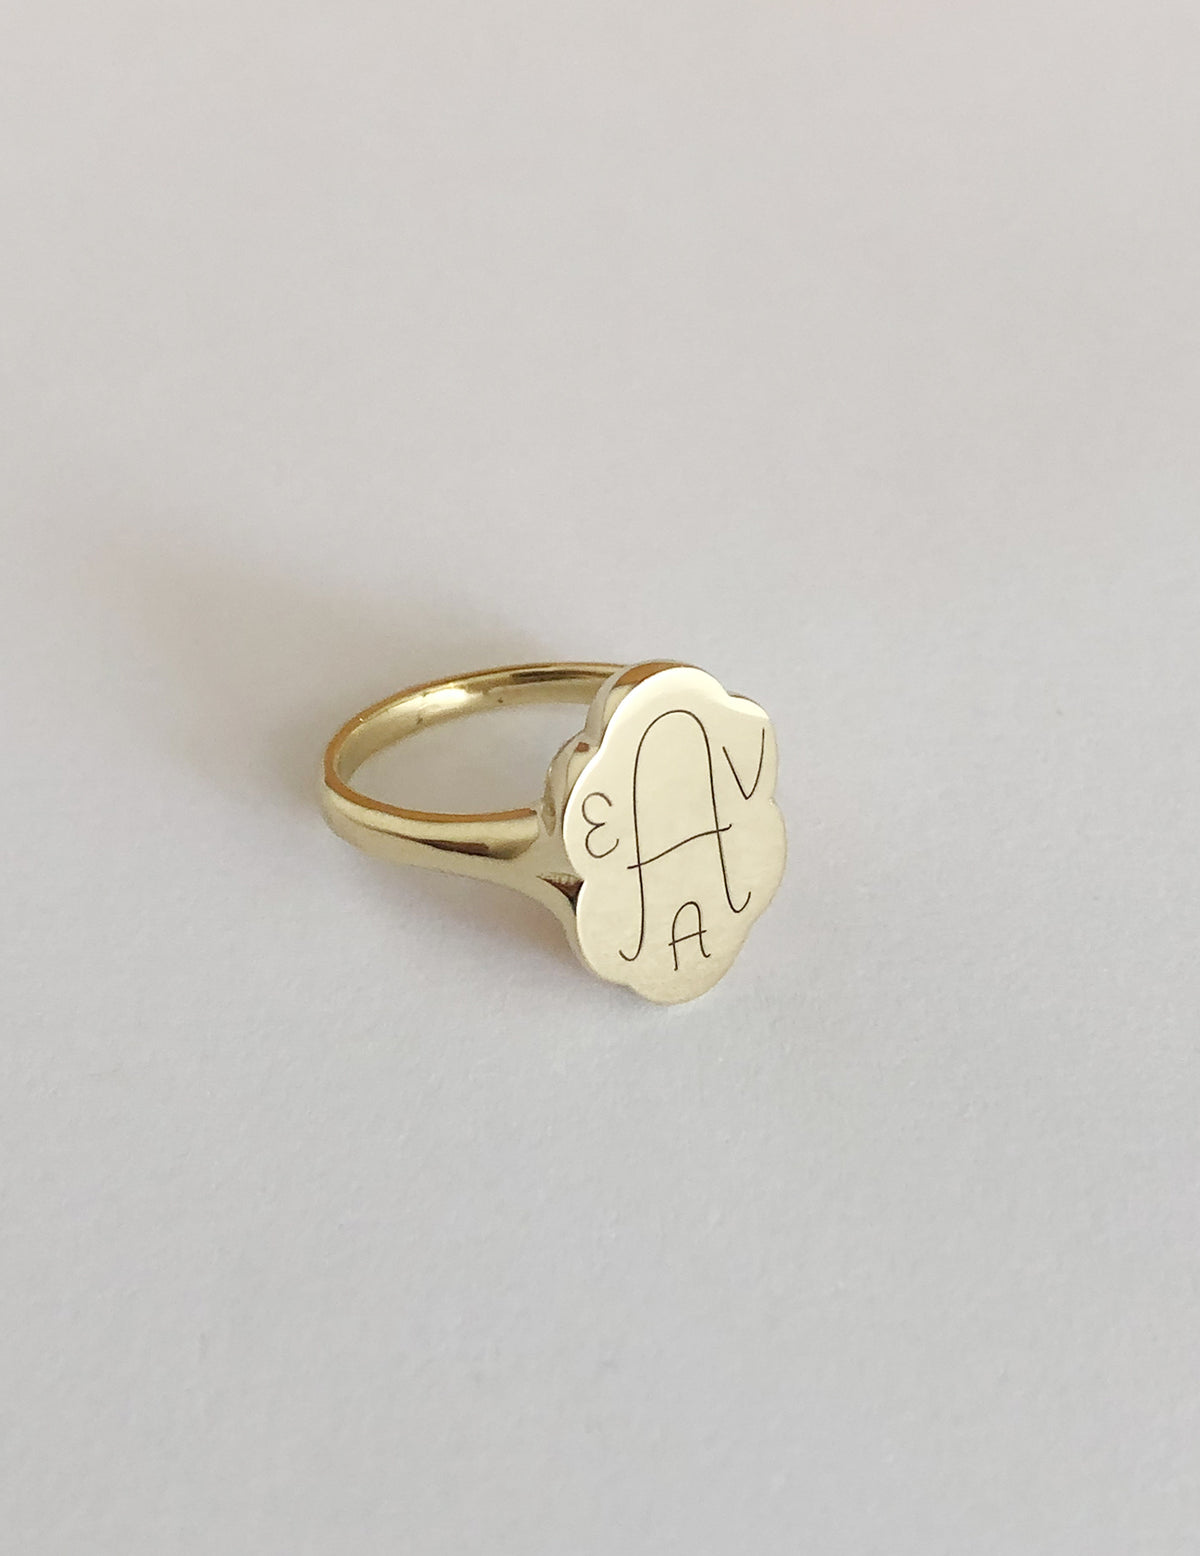 Scallop Signet Ring